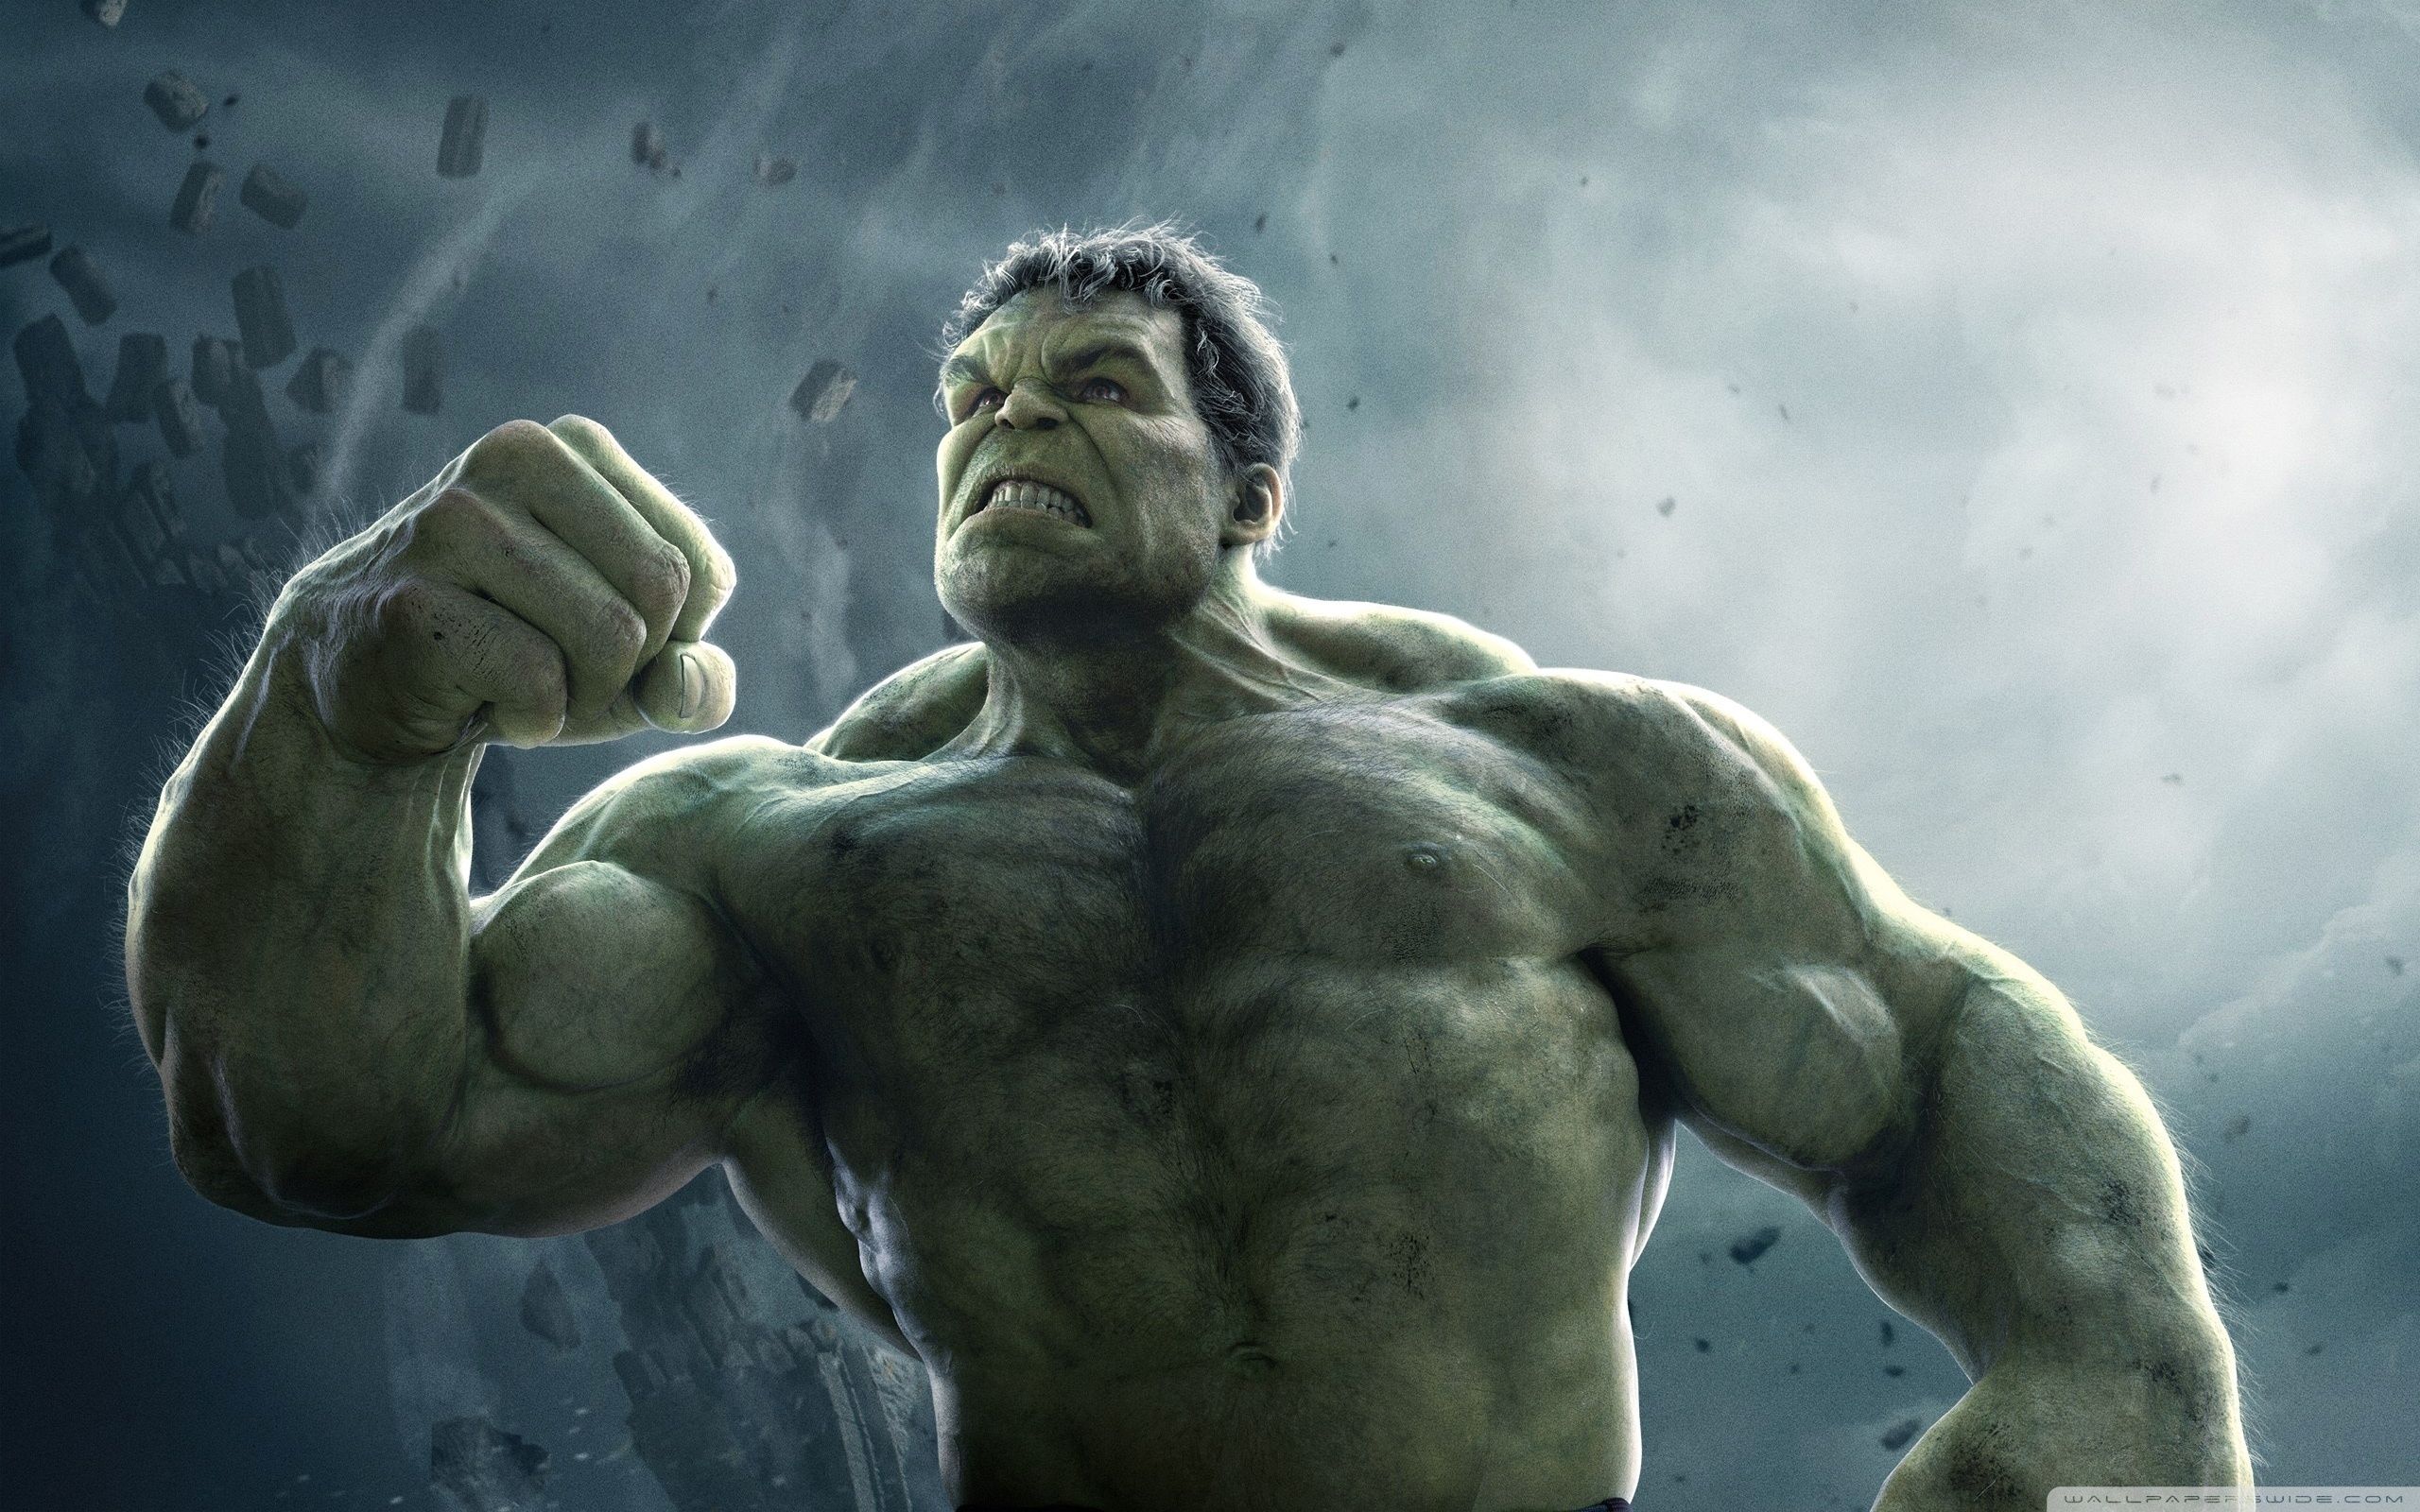 Hulk 4K wallpaper for your desktop or mobile screen free and easy